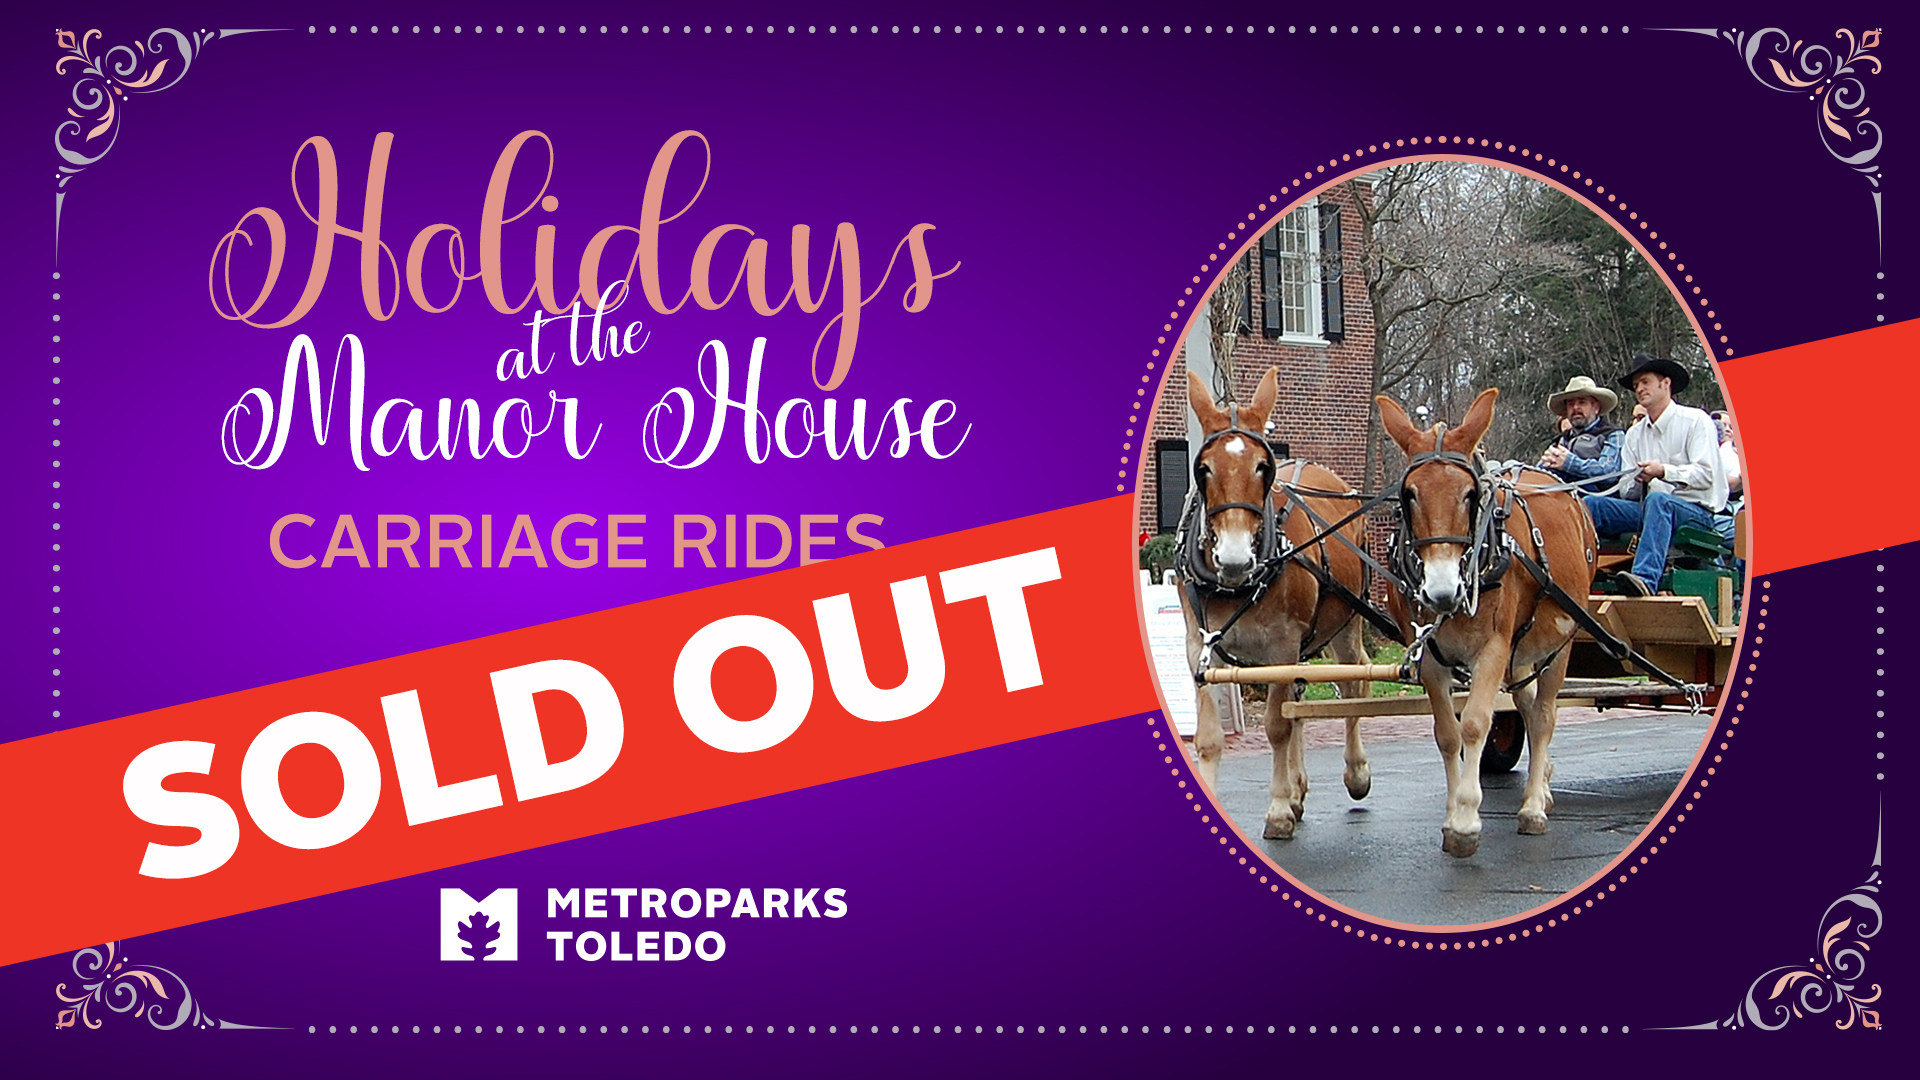 Holidays-Carriage Rides SOLD OUT 1920x1080.jpg